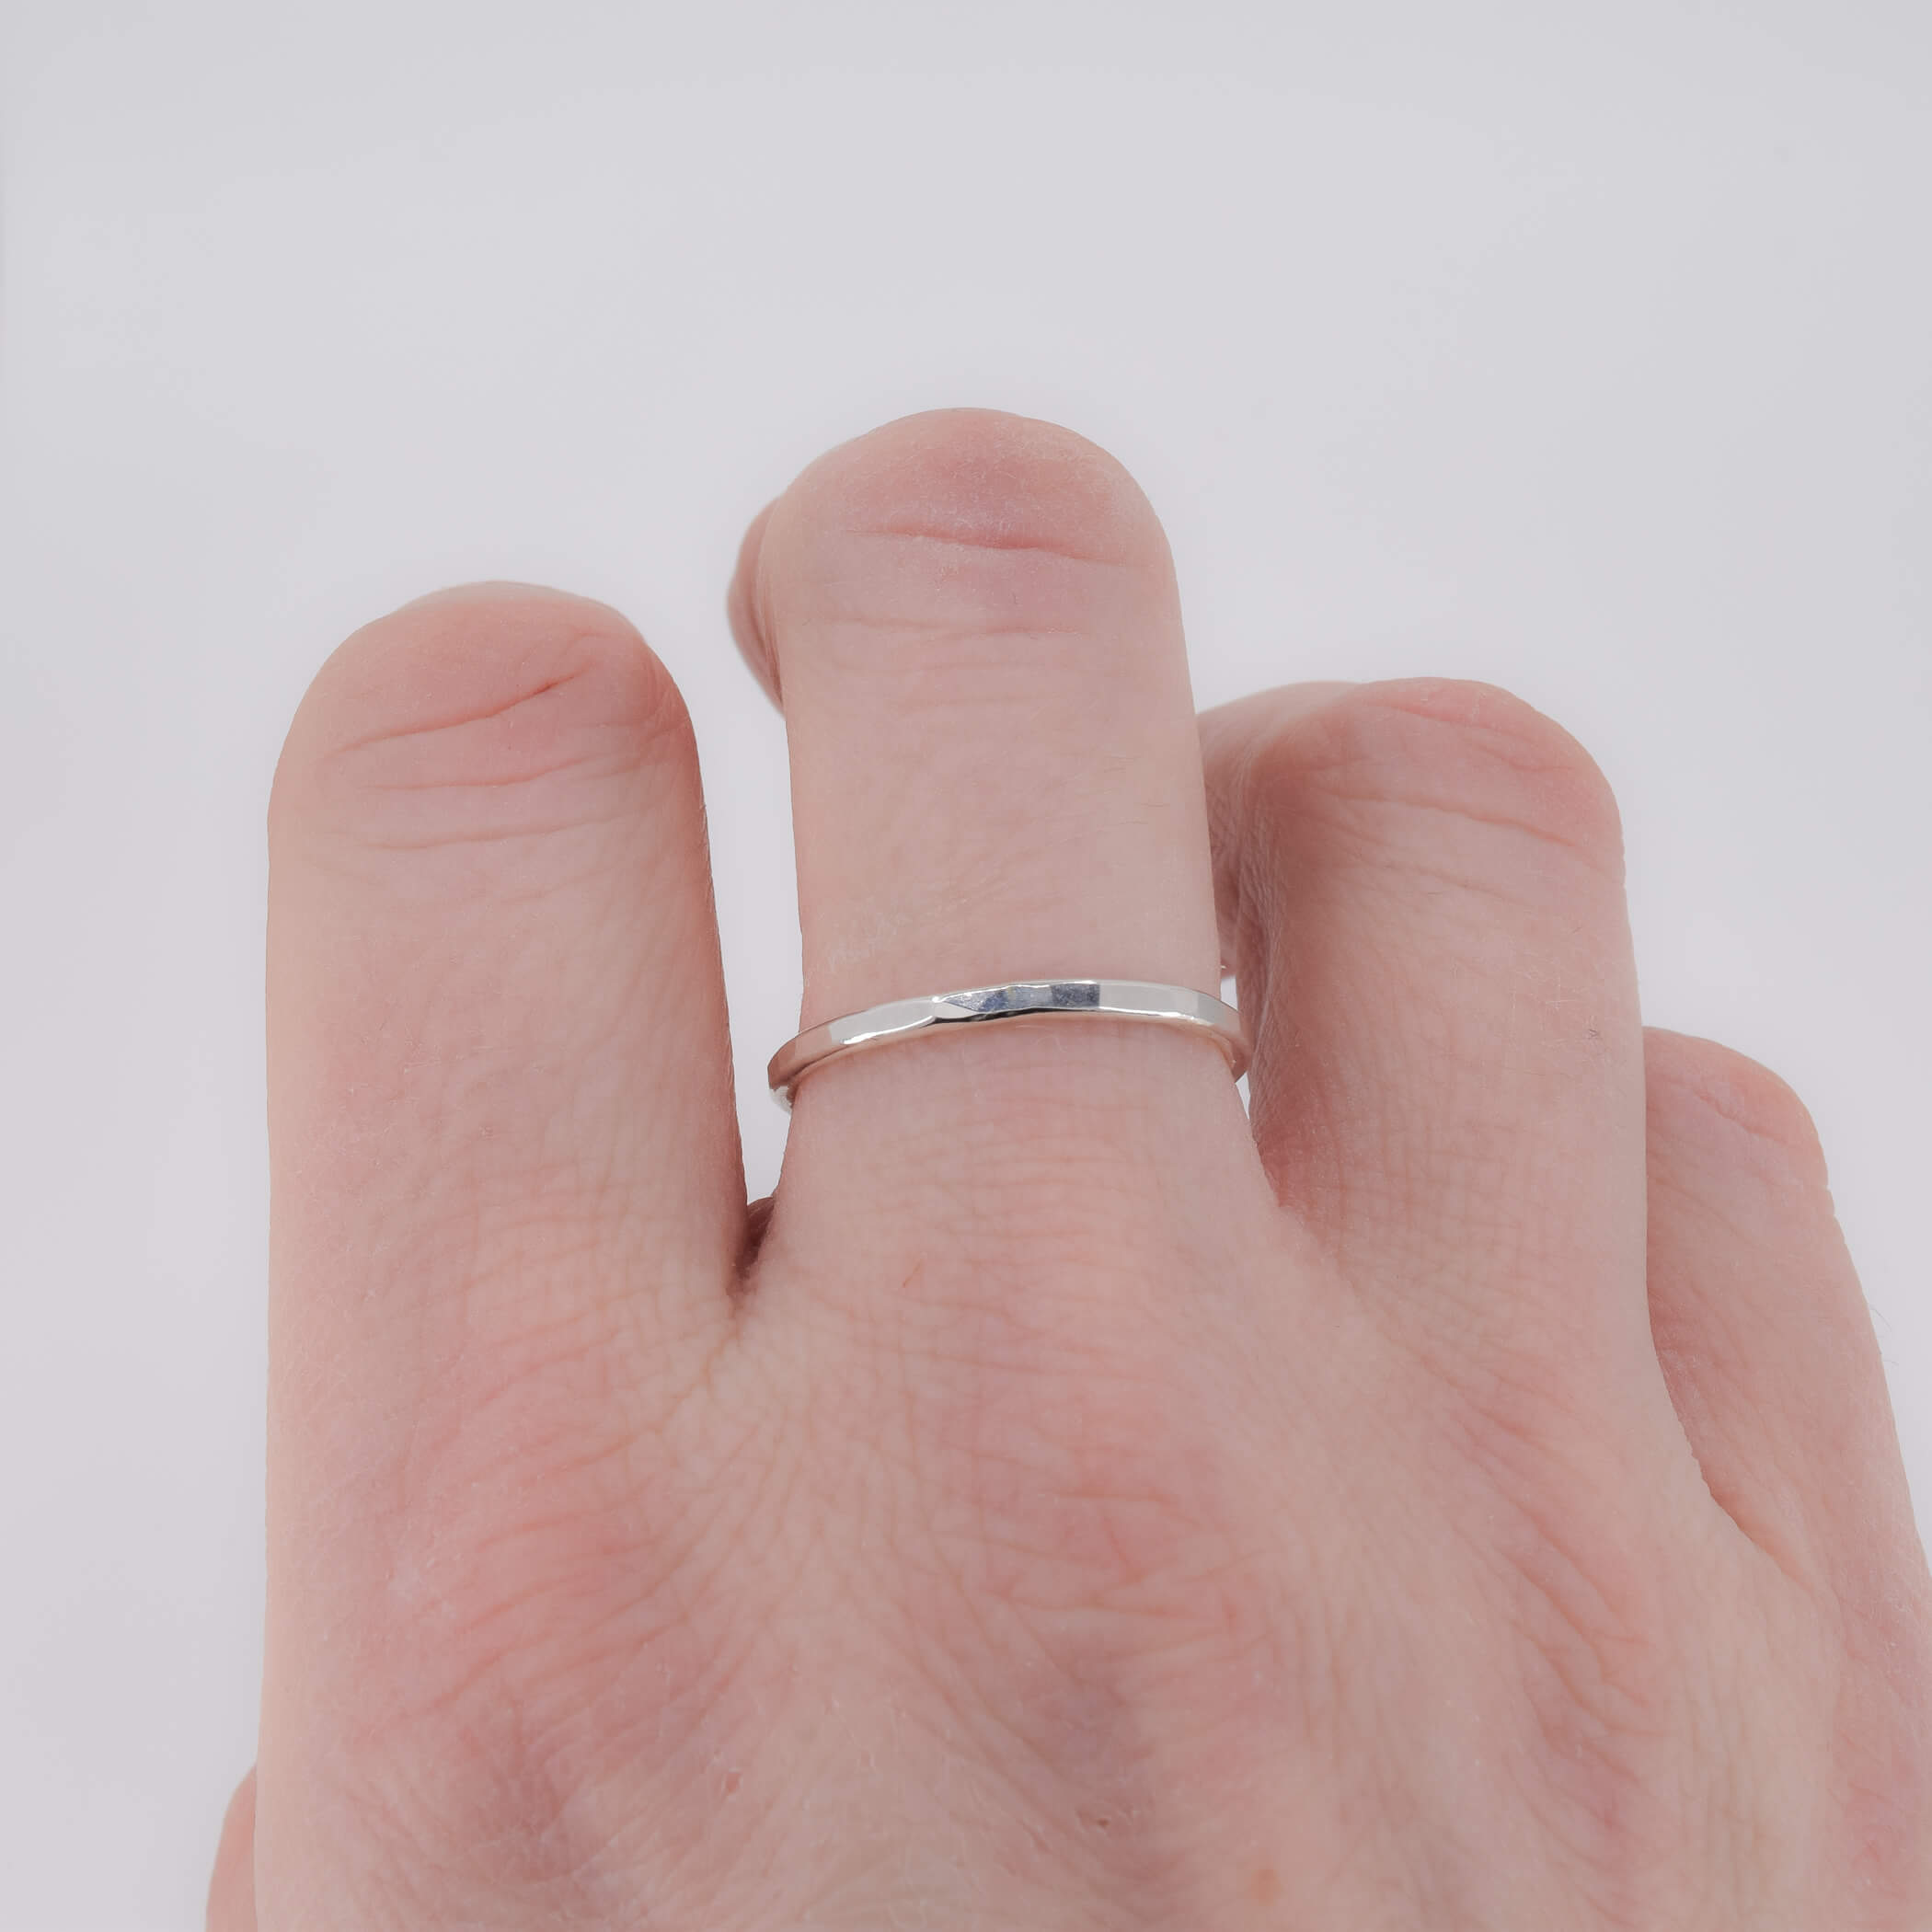 Thin faceted sterling silver stacking ring shown on finger for scale 